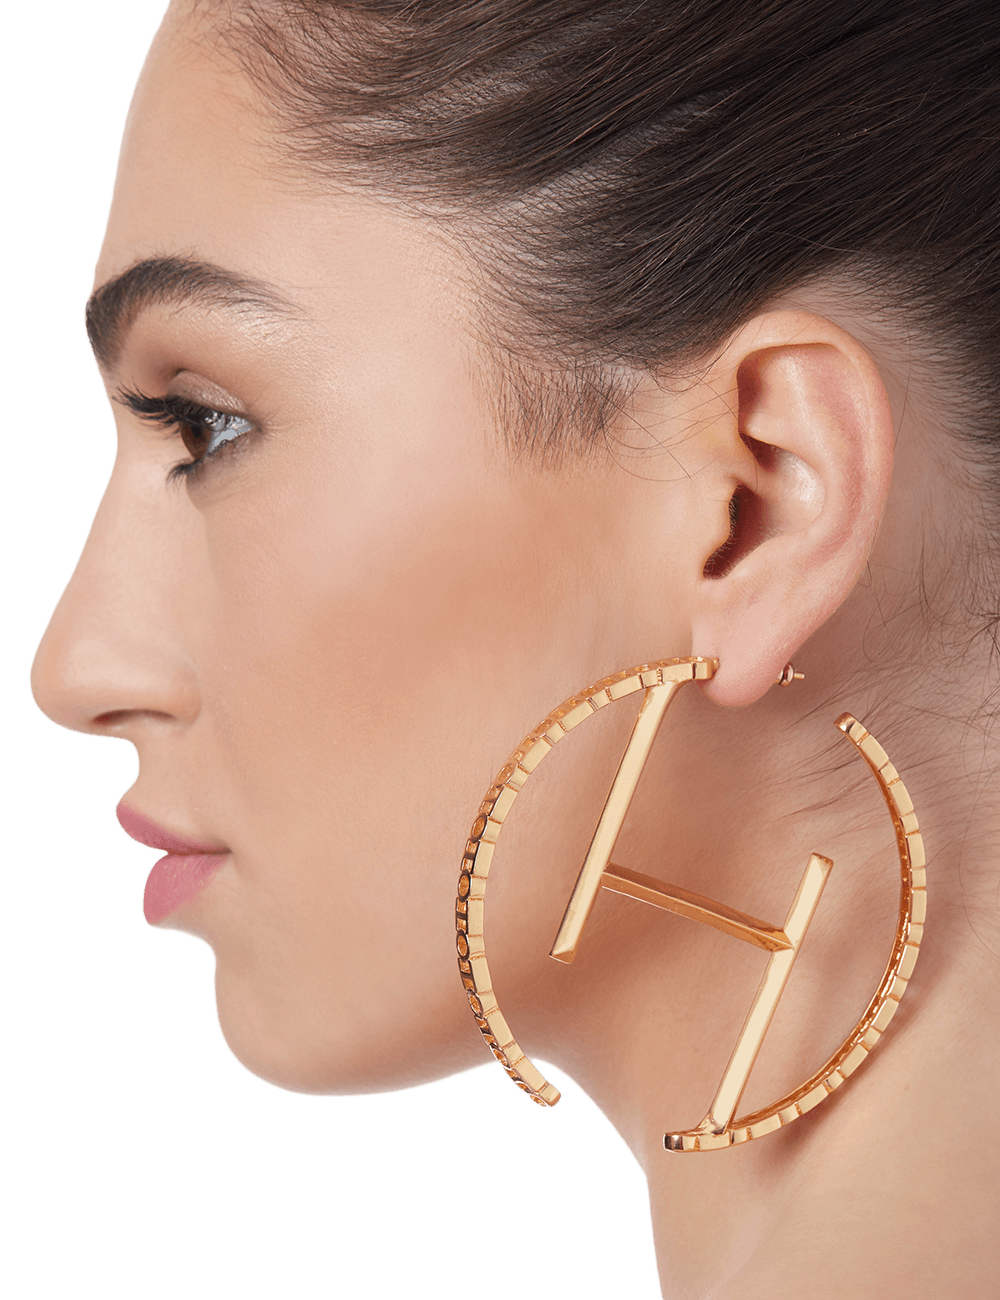 Earrings PNG Images Transparent Free Download  PNGMart